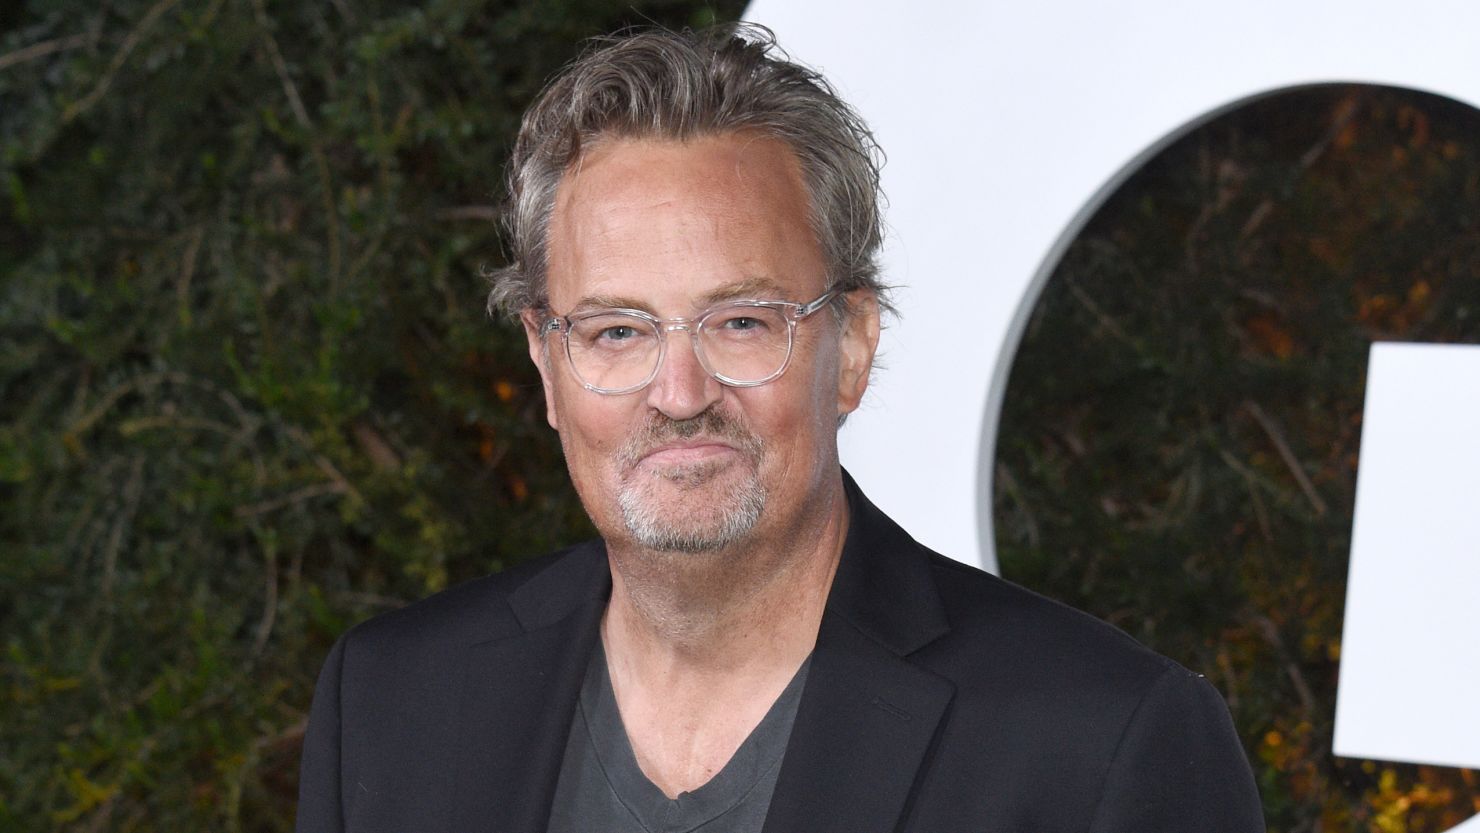 Matthew Perry's Last Time Seen in Public Was Meal with a Friend